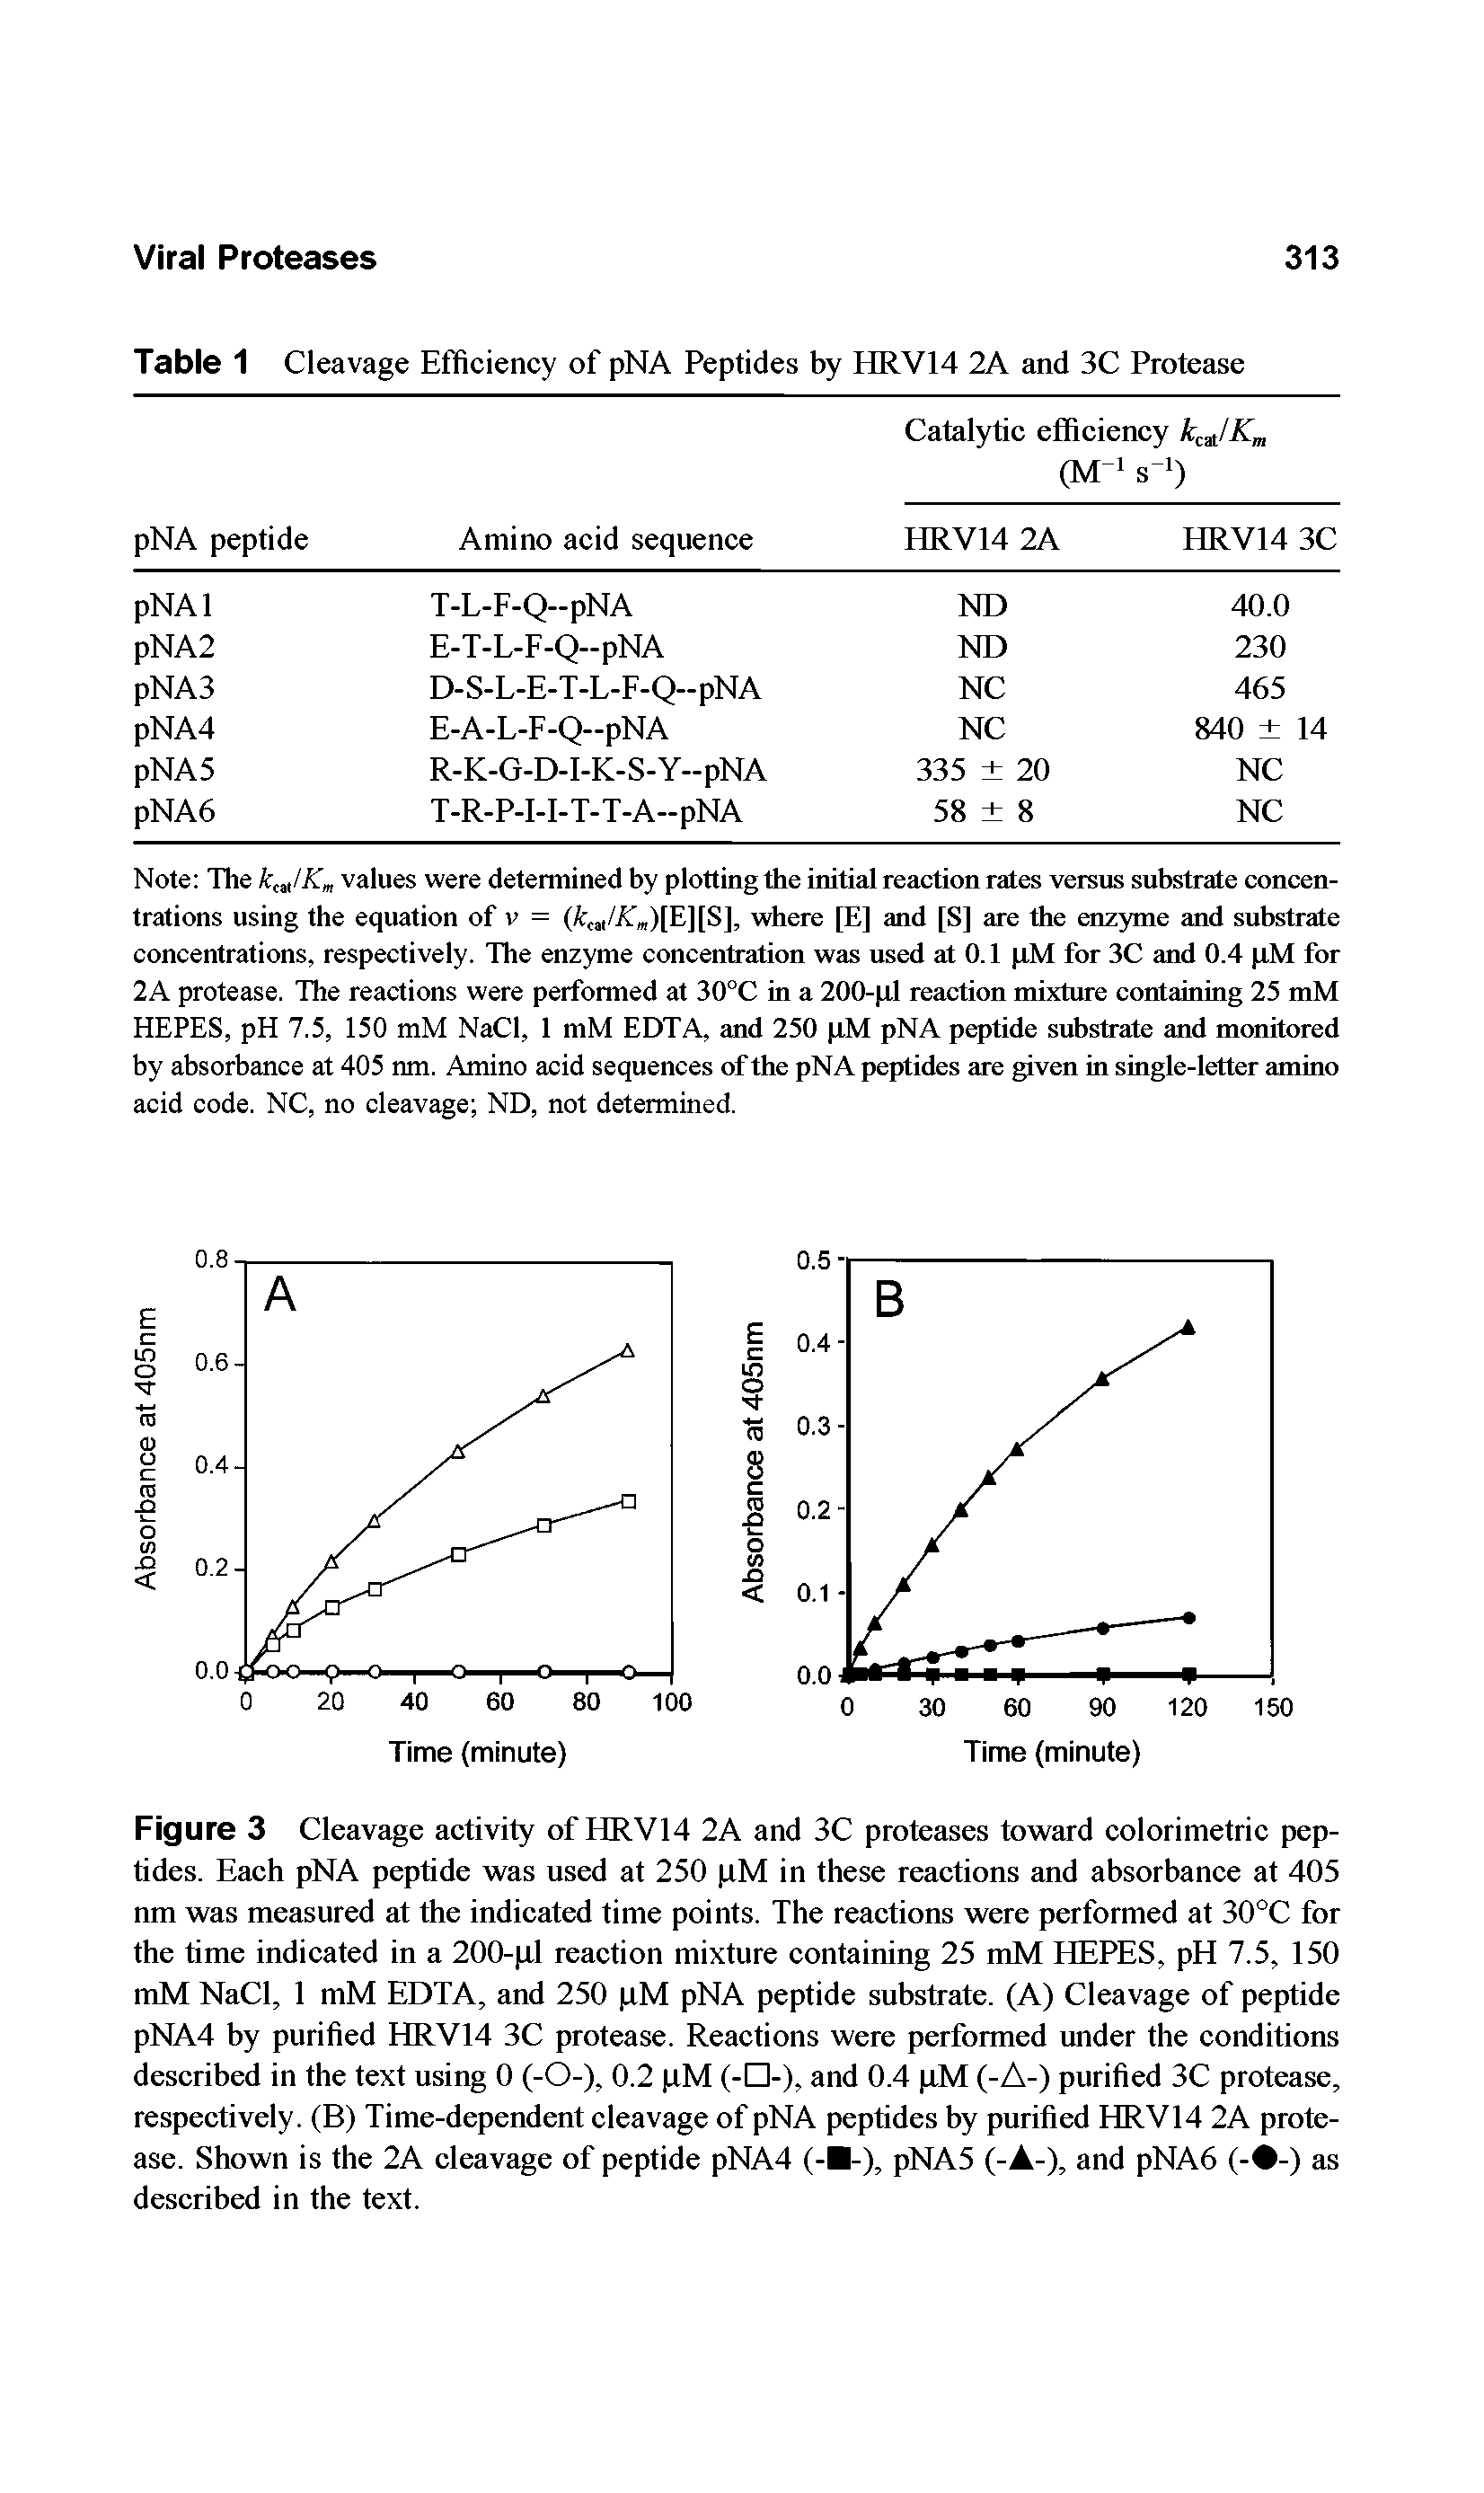 Table 1 Cleavage Efficiency of pNA Peptides by HRV14 2A and 3C Protease...